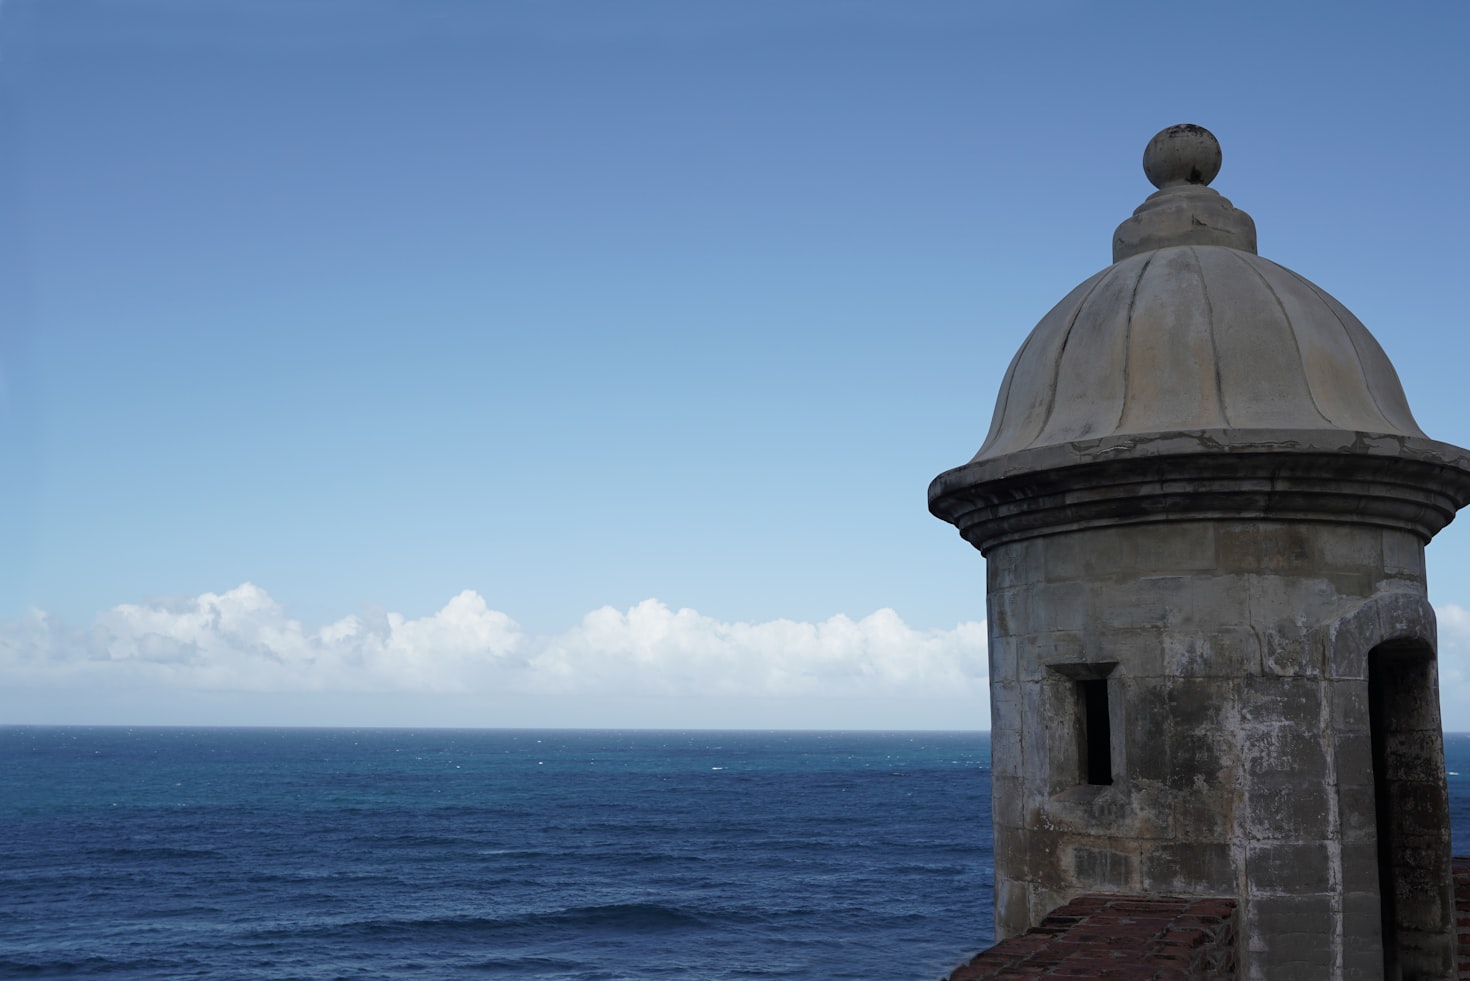 Puerto Rico Travel Guide - Attractions, What to See, Do, Costs, FAQs